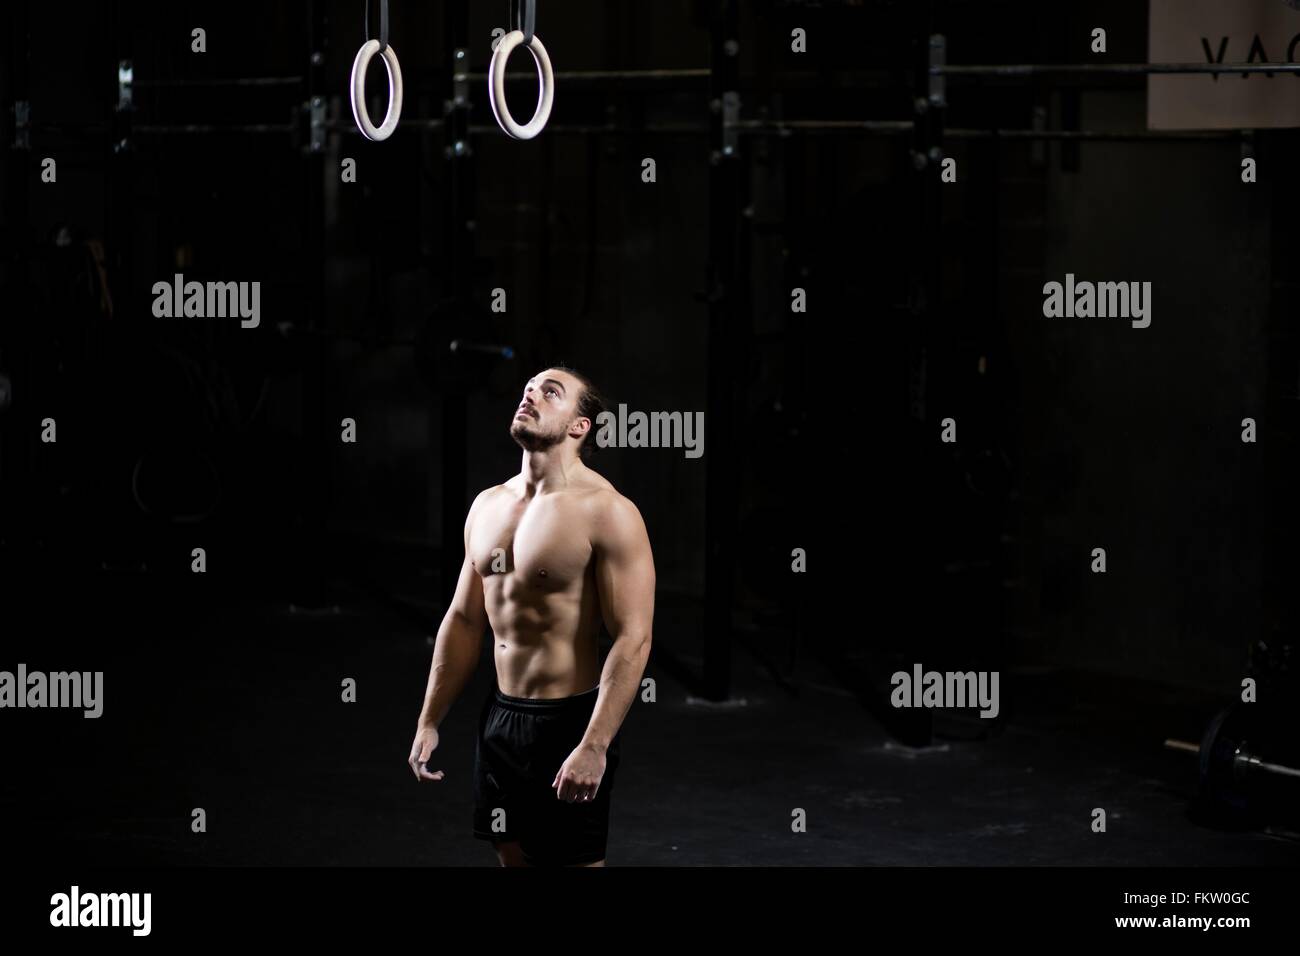 Bare chested young man preparing to use gym rings in dark gym Stock Photo